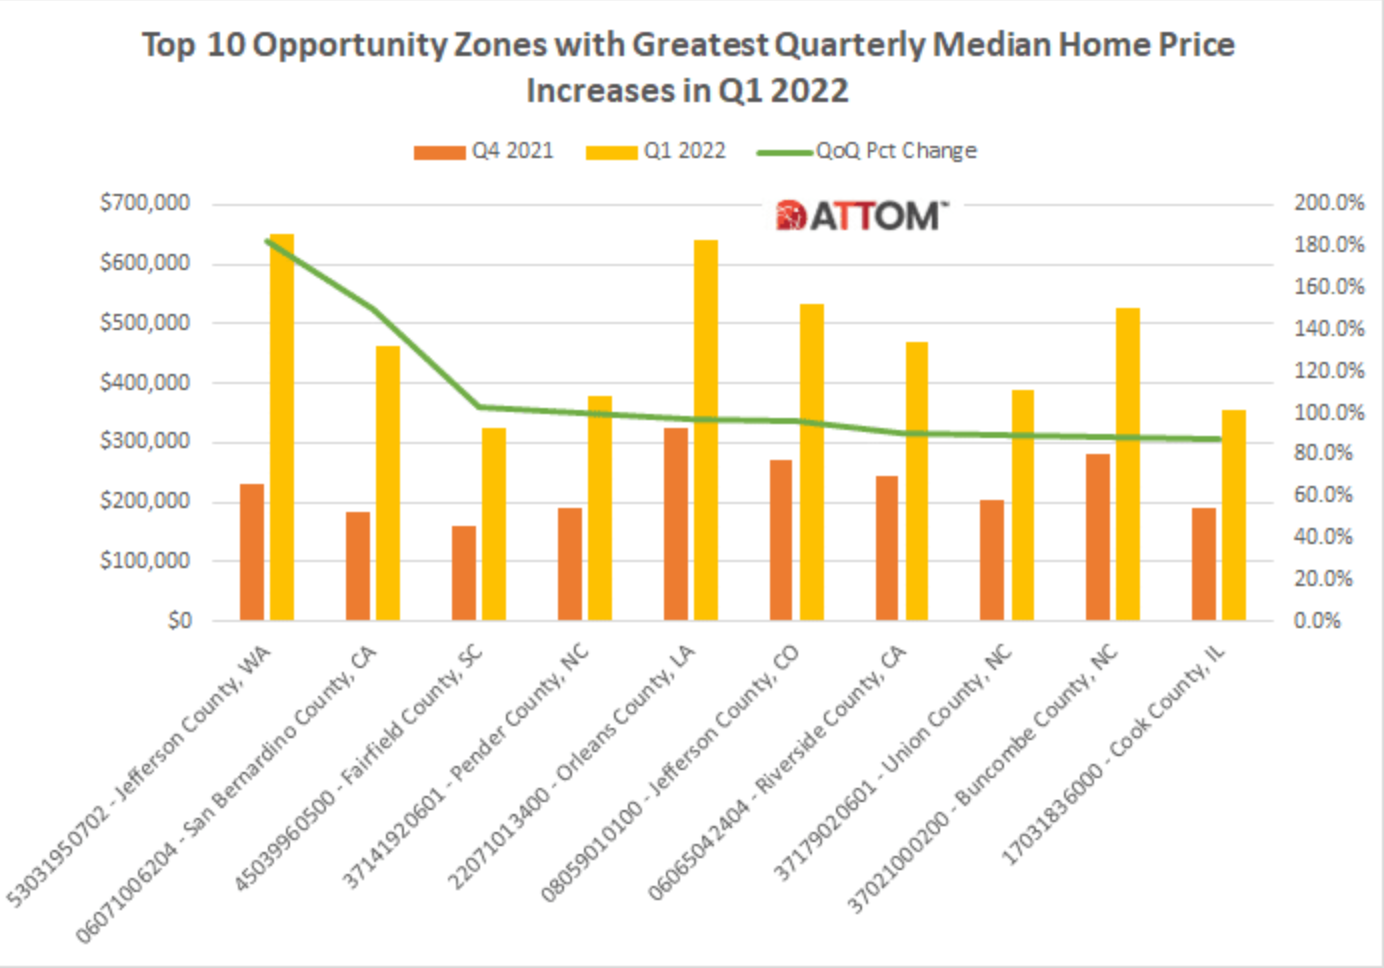 A bar chart showing the top 10 opportunity zones with the greatest quarterly median home price increases.